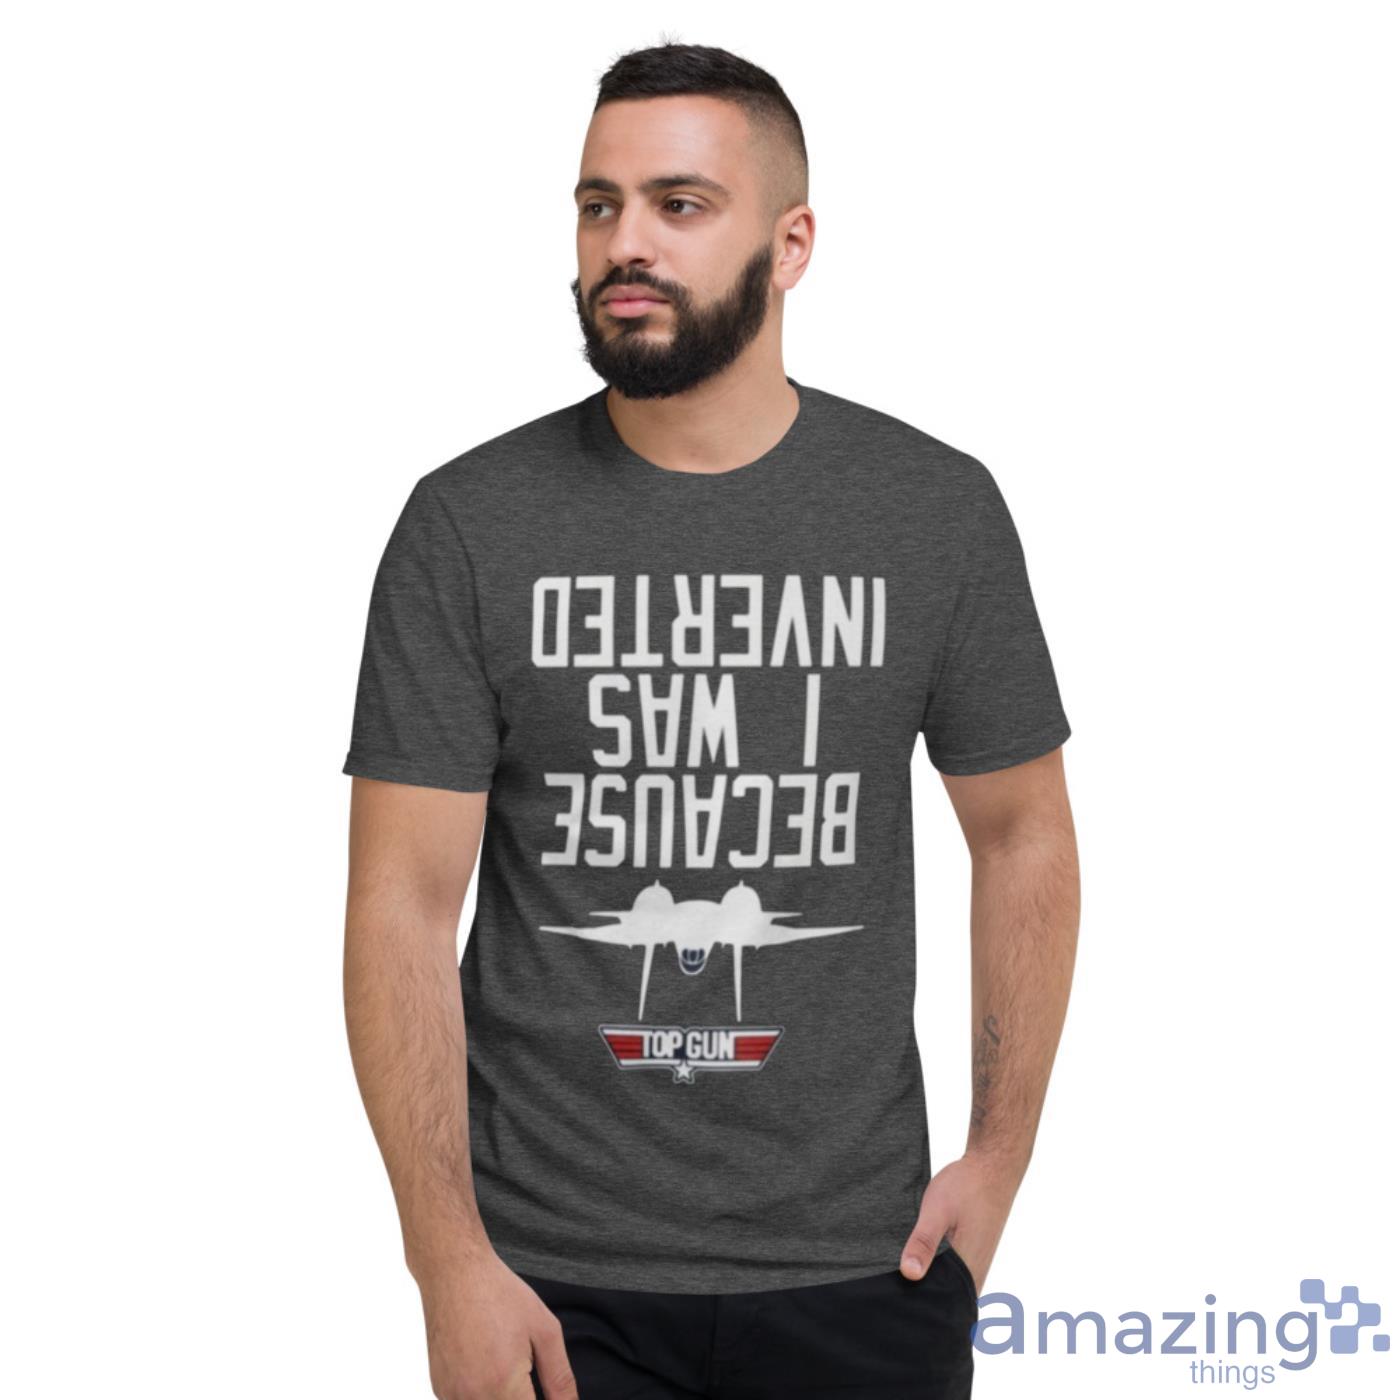 Men's Top Gun Because I was Inverted shirt, hoodie, sweater, longsleeve and  V-neck T-shirt